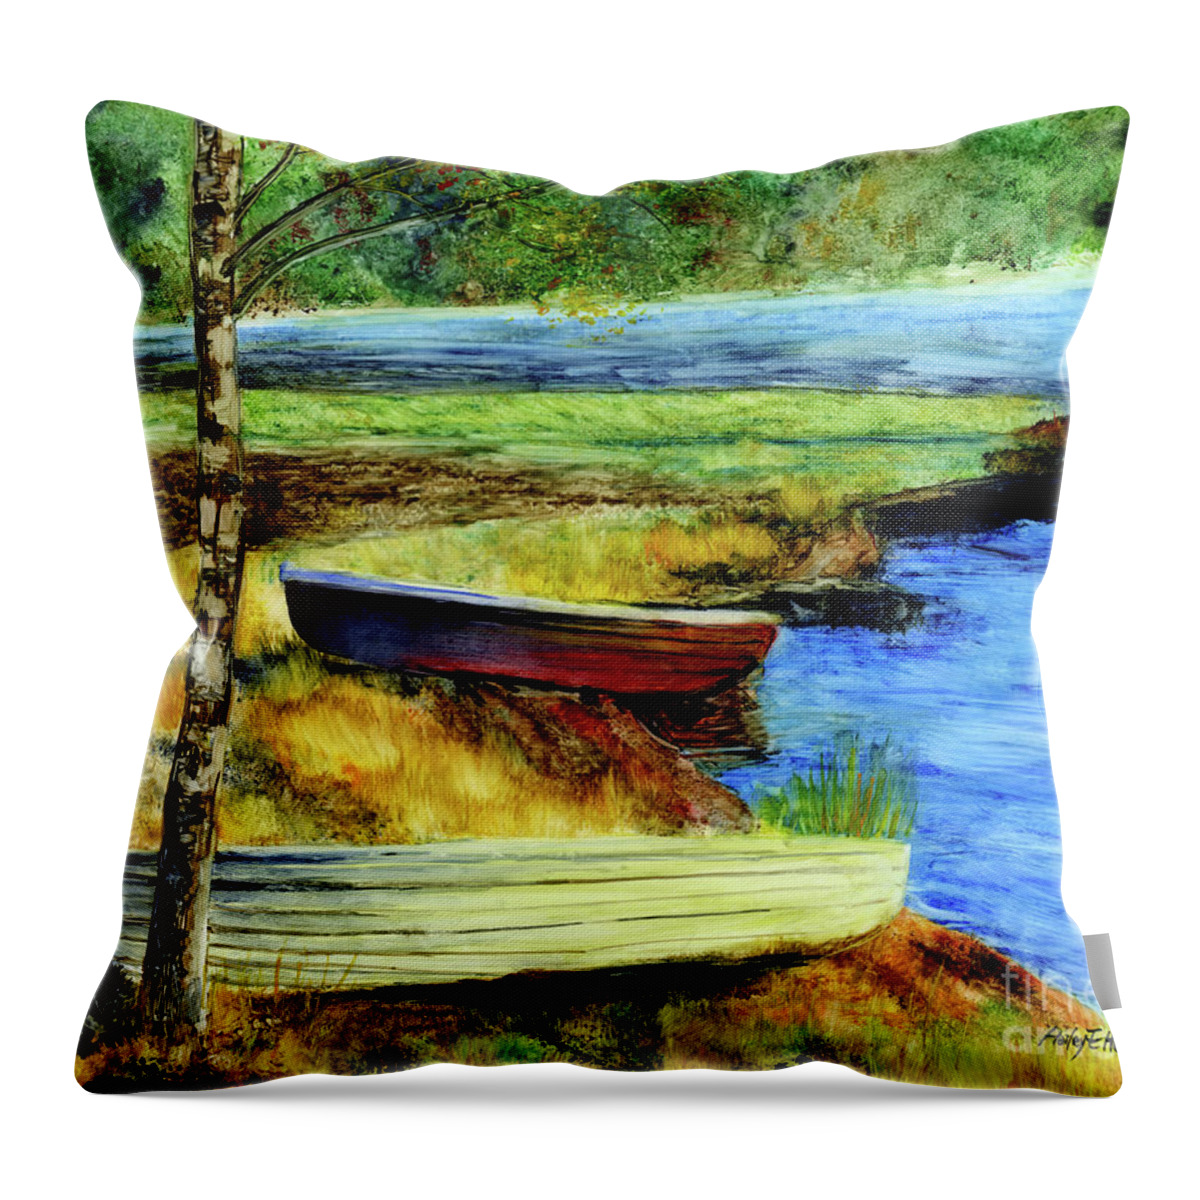 Boats Throw Pillow featuring the painting Resting Boats by Hailey E Herrera